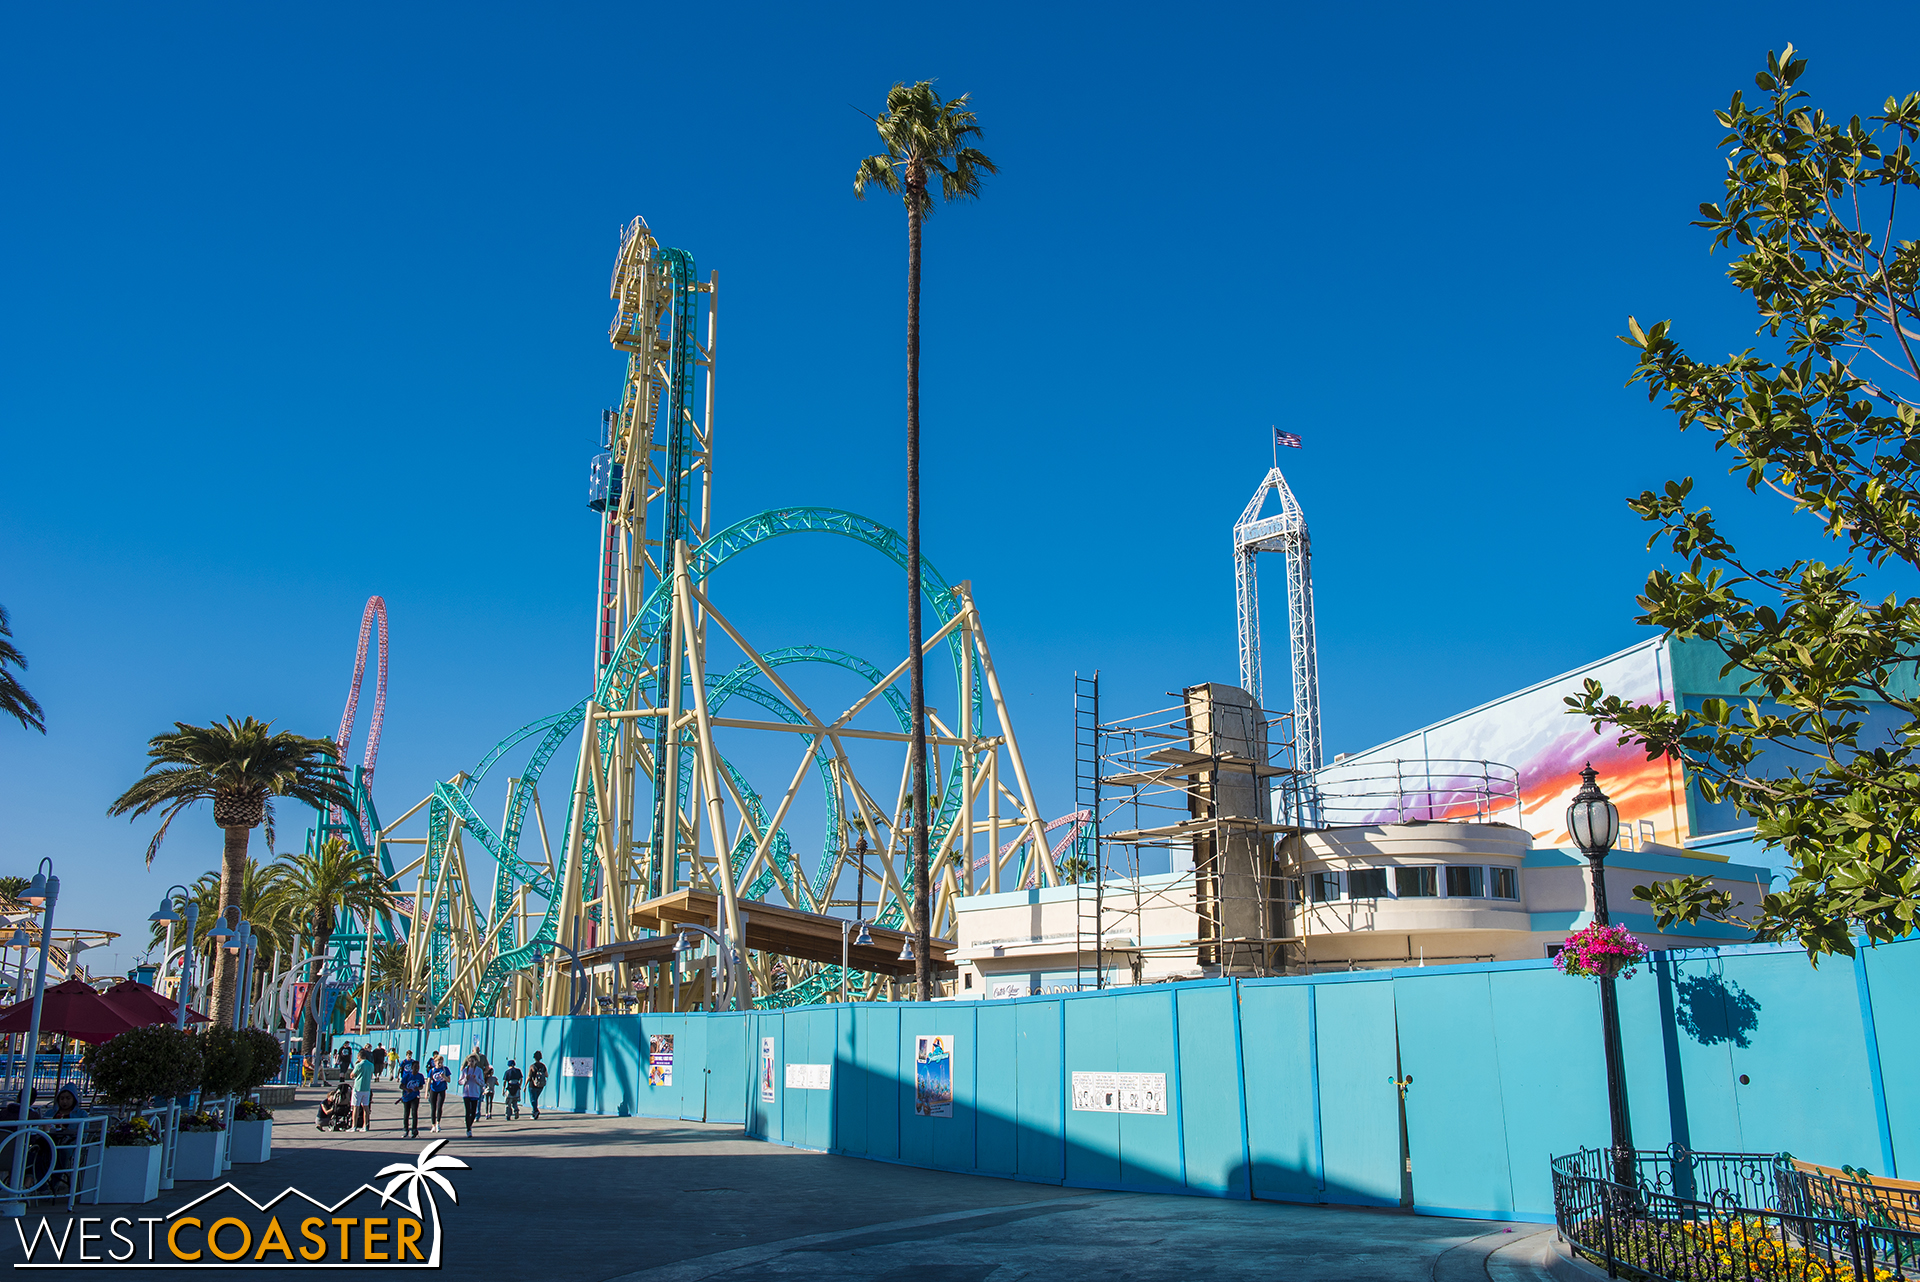  It’s needed as the park heads down its home stretch finishing up HangTime, to tie the existing pavement into the new flatwork exiting the ride and souvenir shop. 